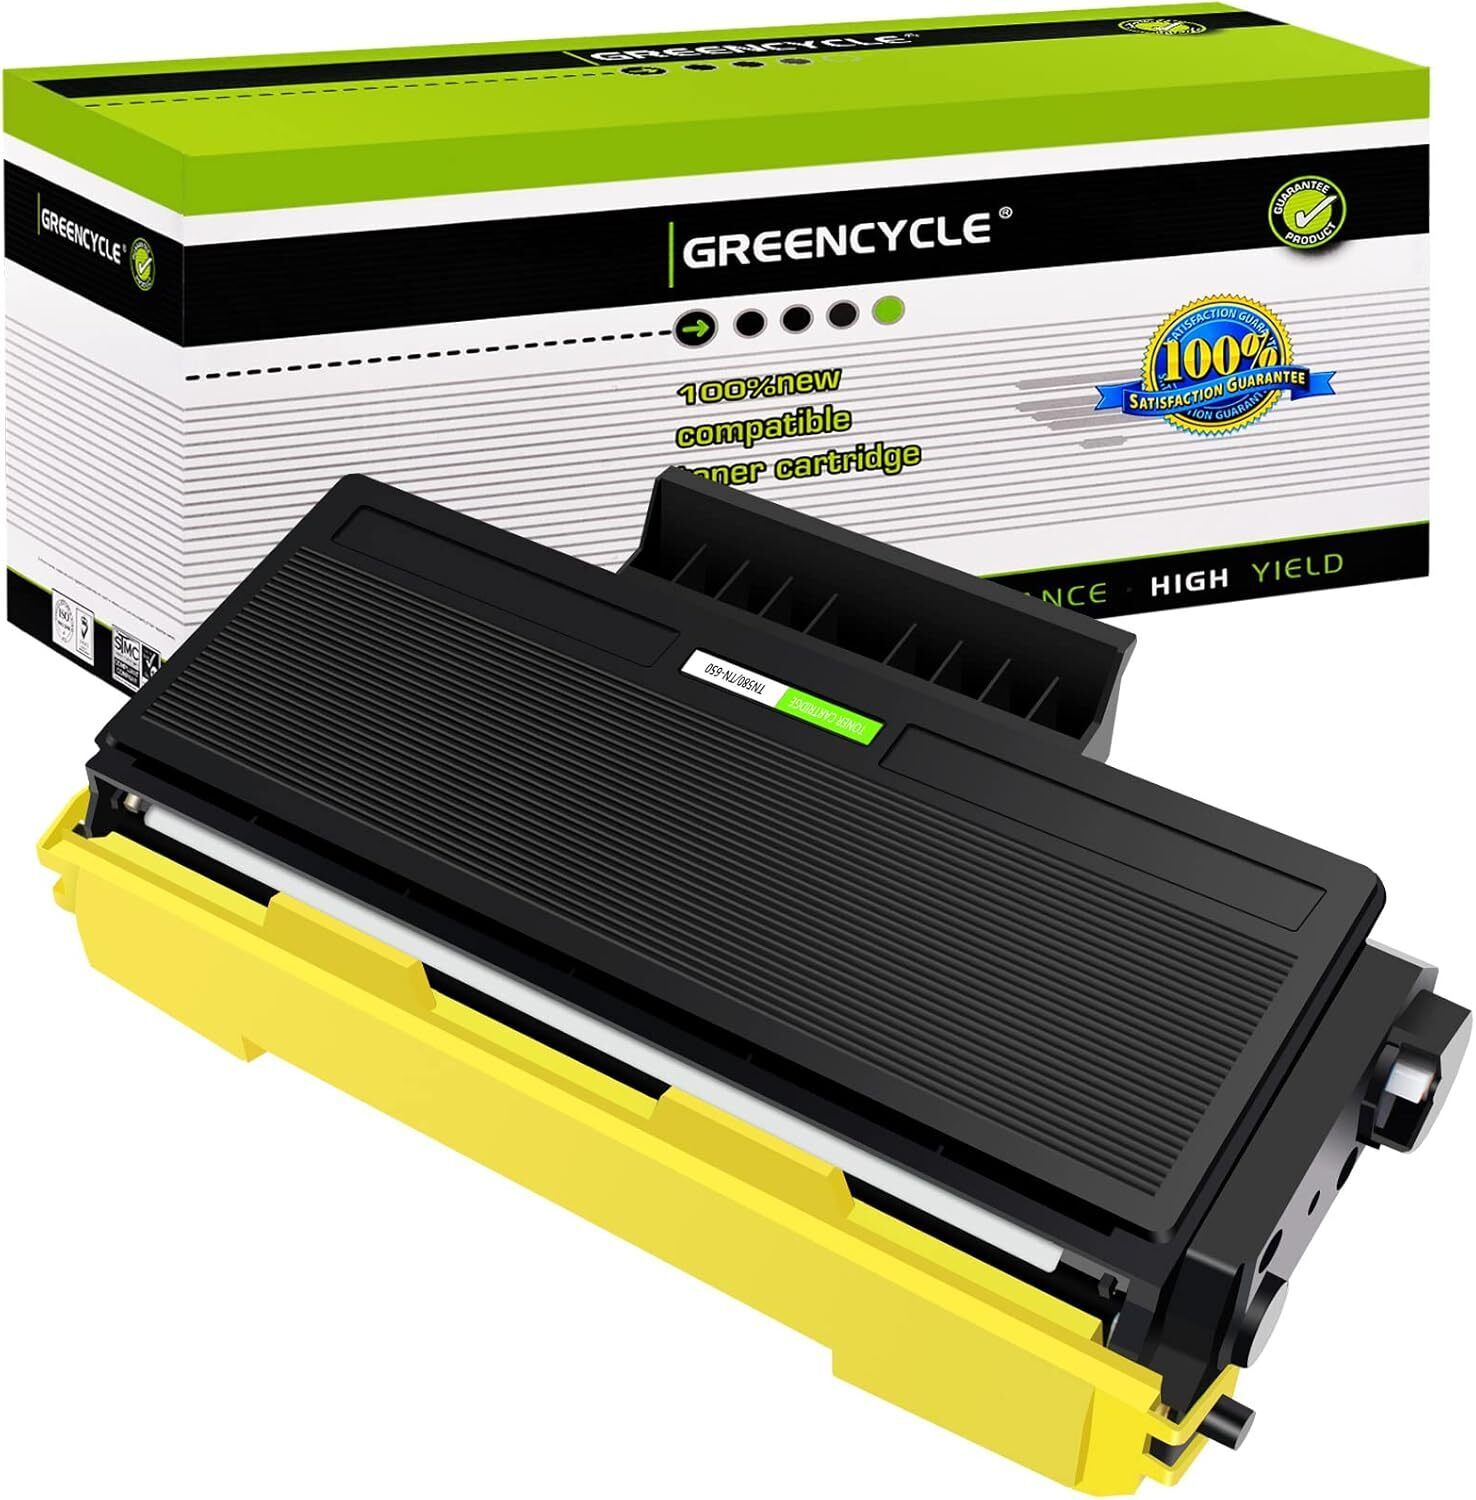 High Yield Compatible BlacK Toner Cartridge for Brother TN580 TN-580 MFC-8690DW